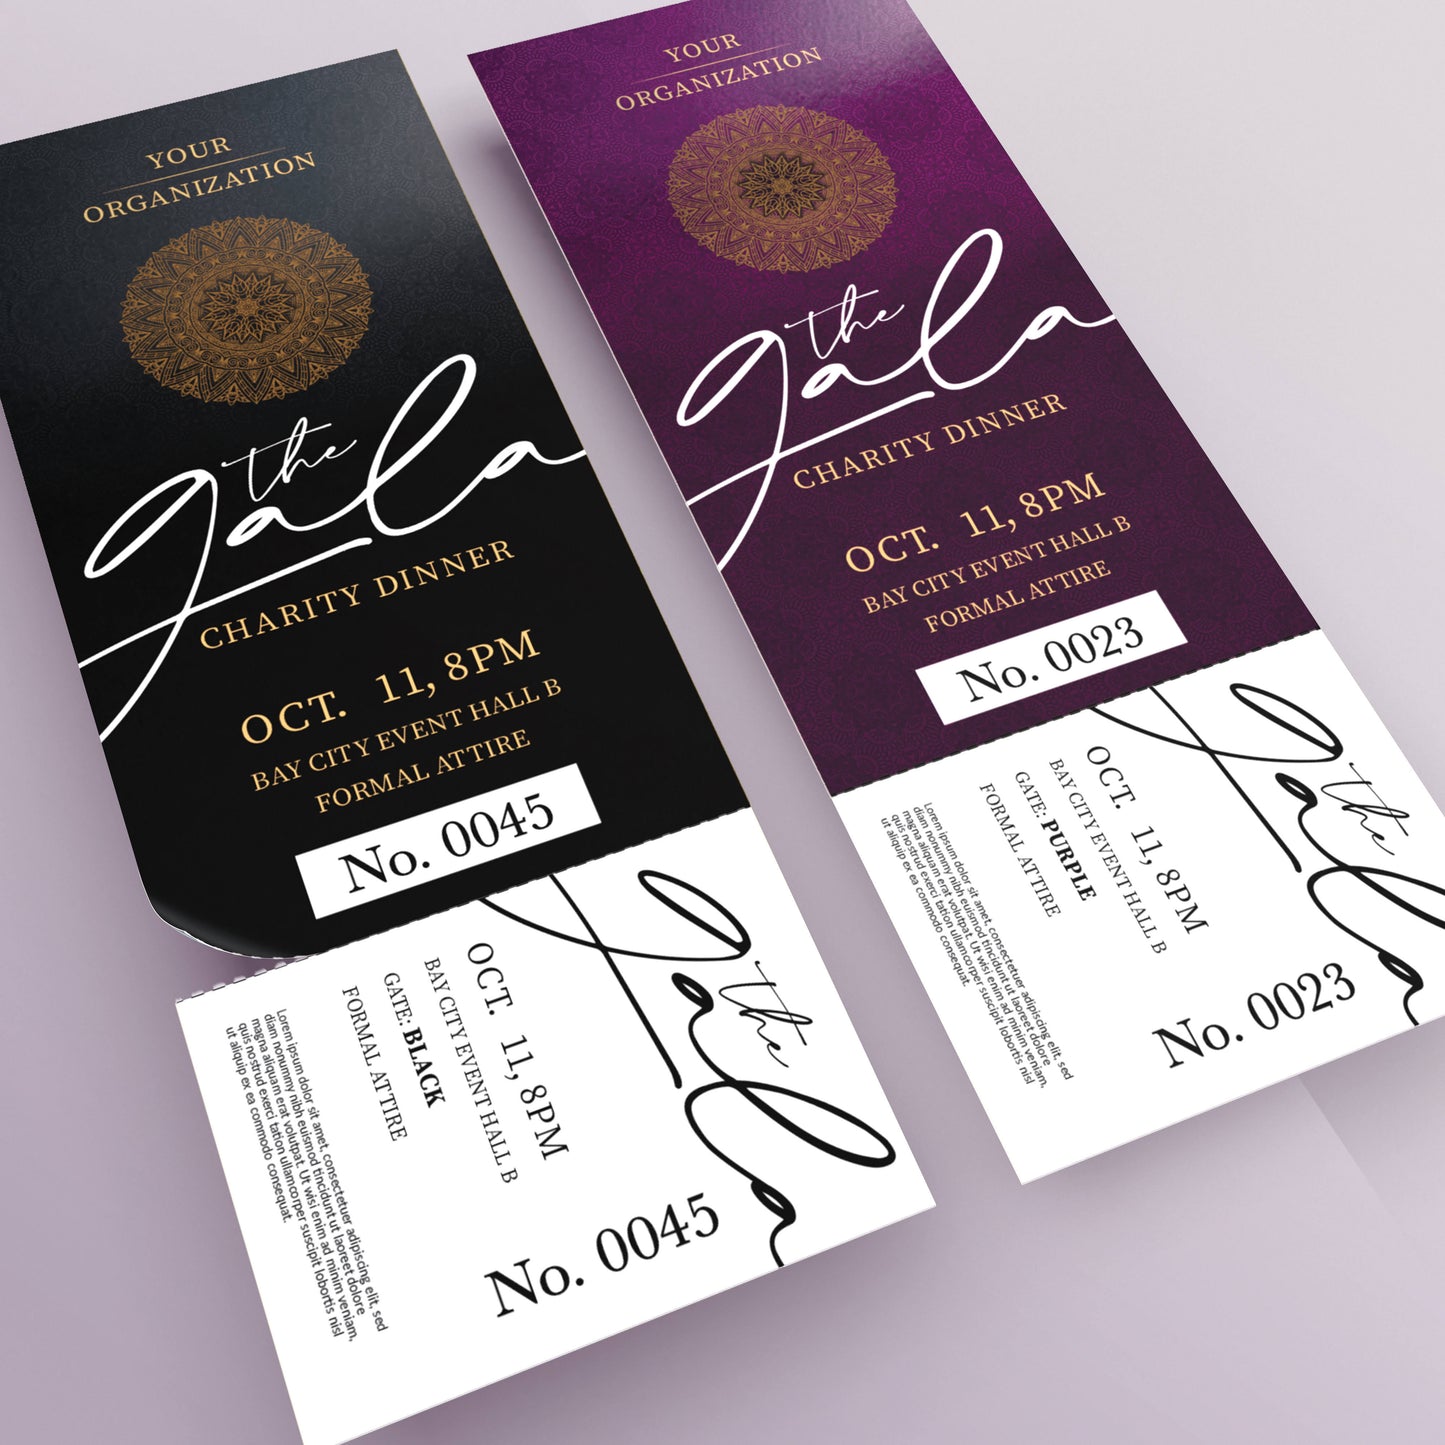 Custom Event Tickets - Fast Turnaround Time, 1 Day Printing